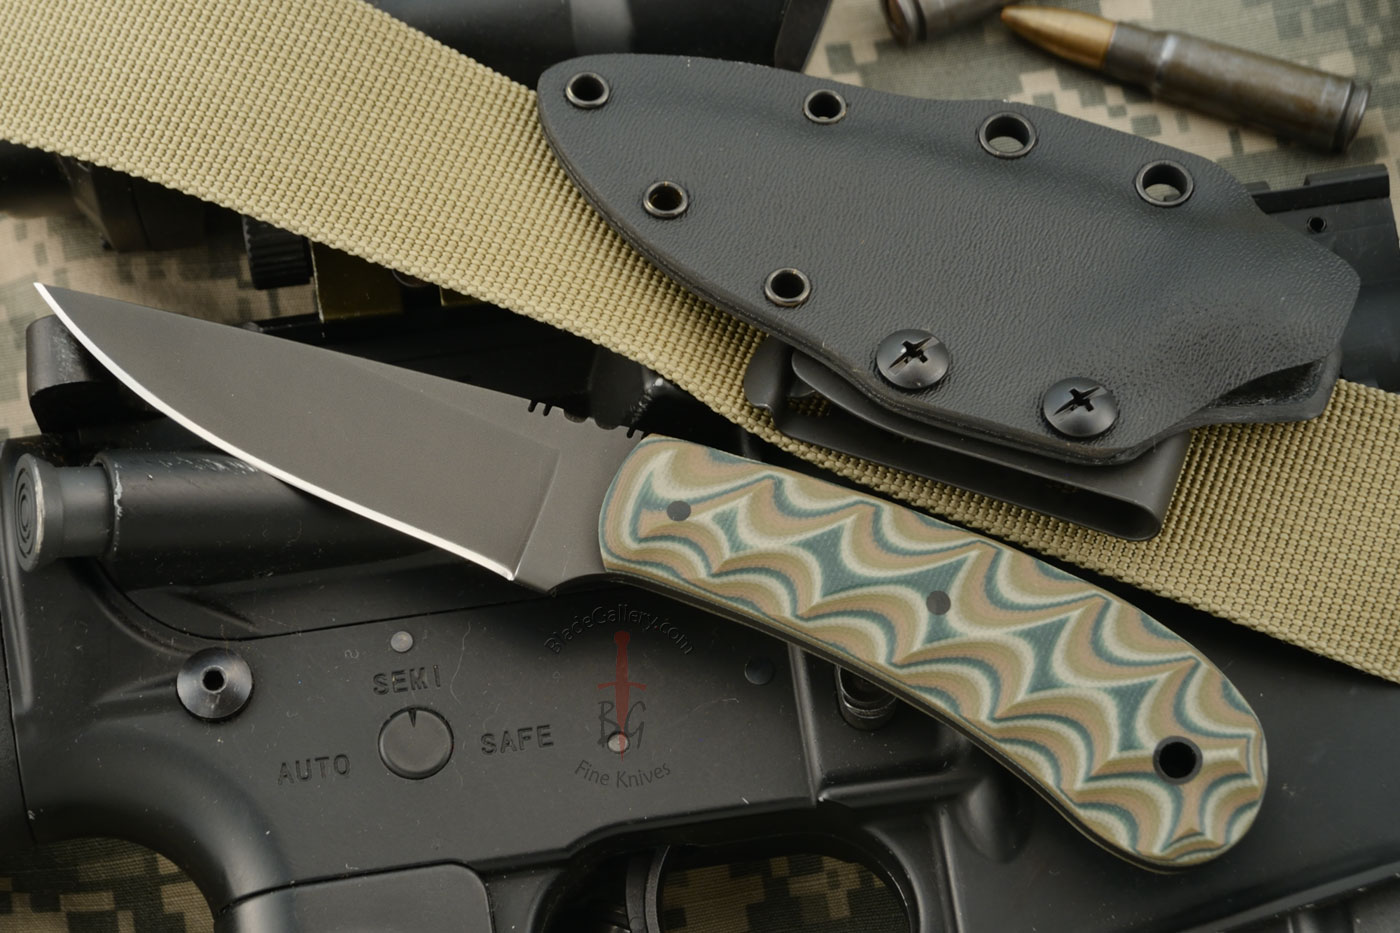 Standard Duty 2 (SD2) with Sculpted Multicam G10